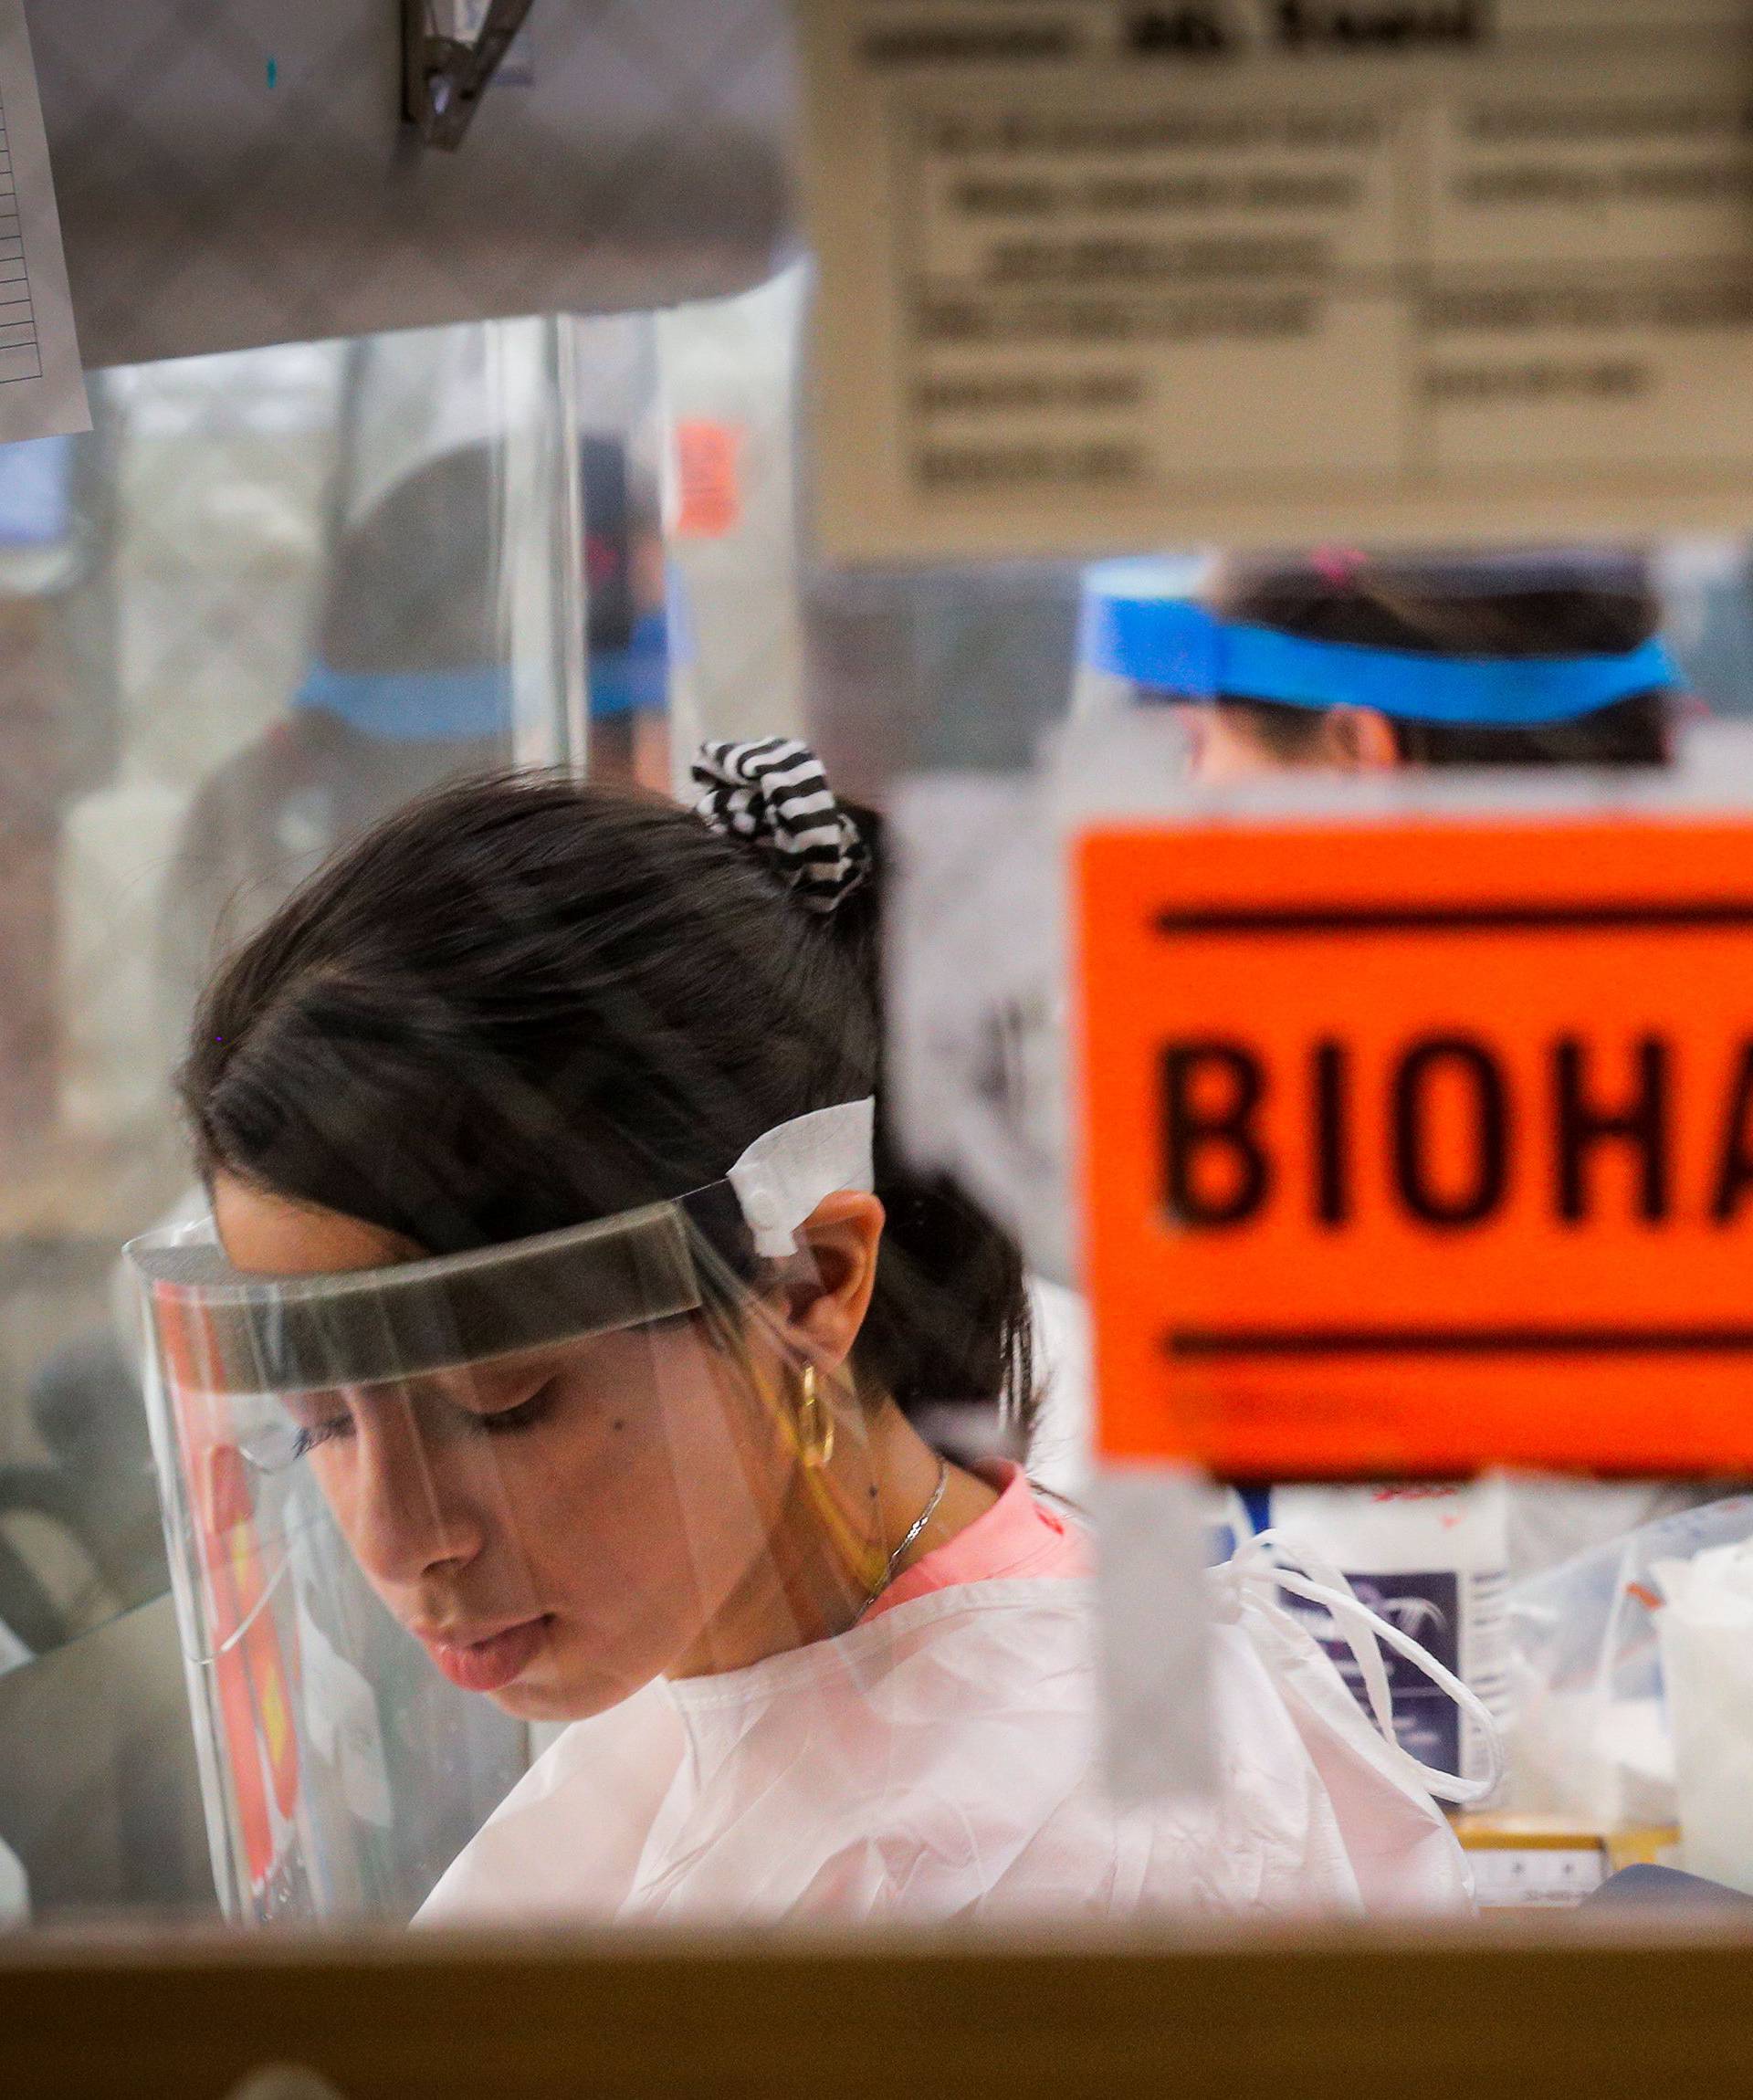 Scientists work in a lab testing COVID-19 samples at New York City's health department, during the outbreak of the coronavirus disease (COVID-19) in New York